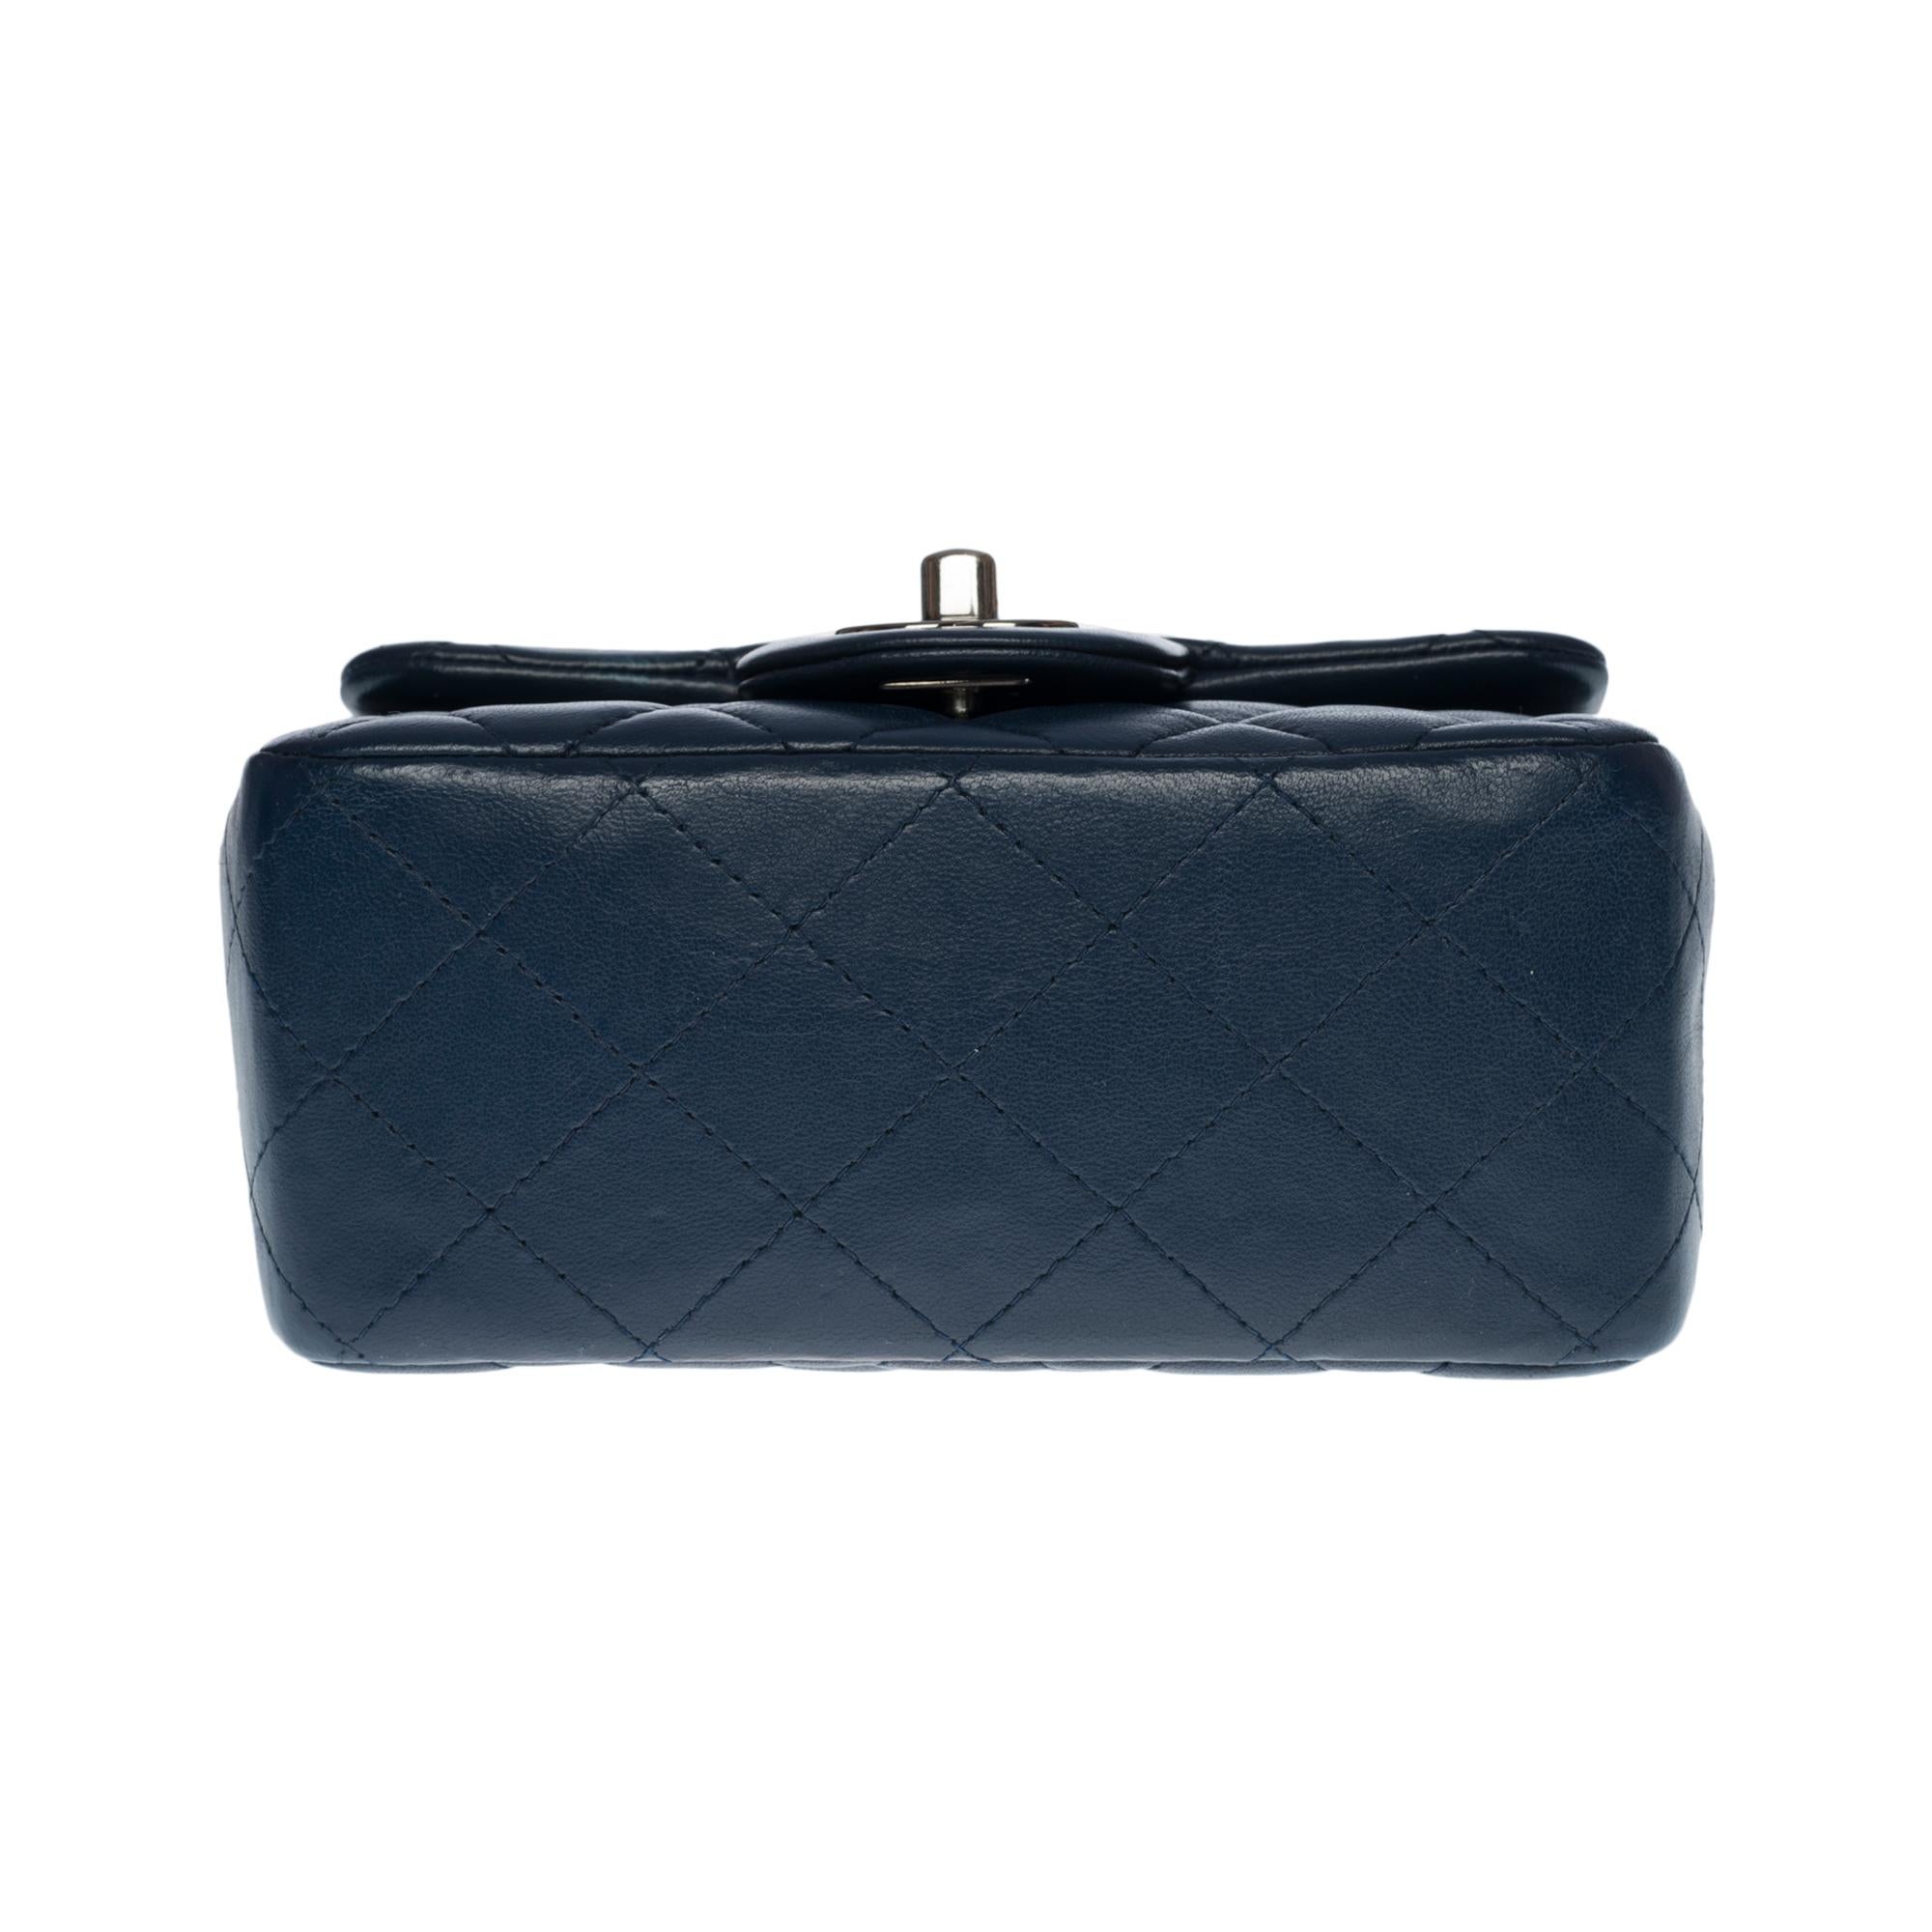 Chanel Mini Timeless Shoulder Flap bag in Dark Blue quilted leather, SHW 4